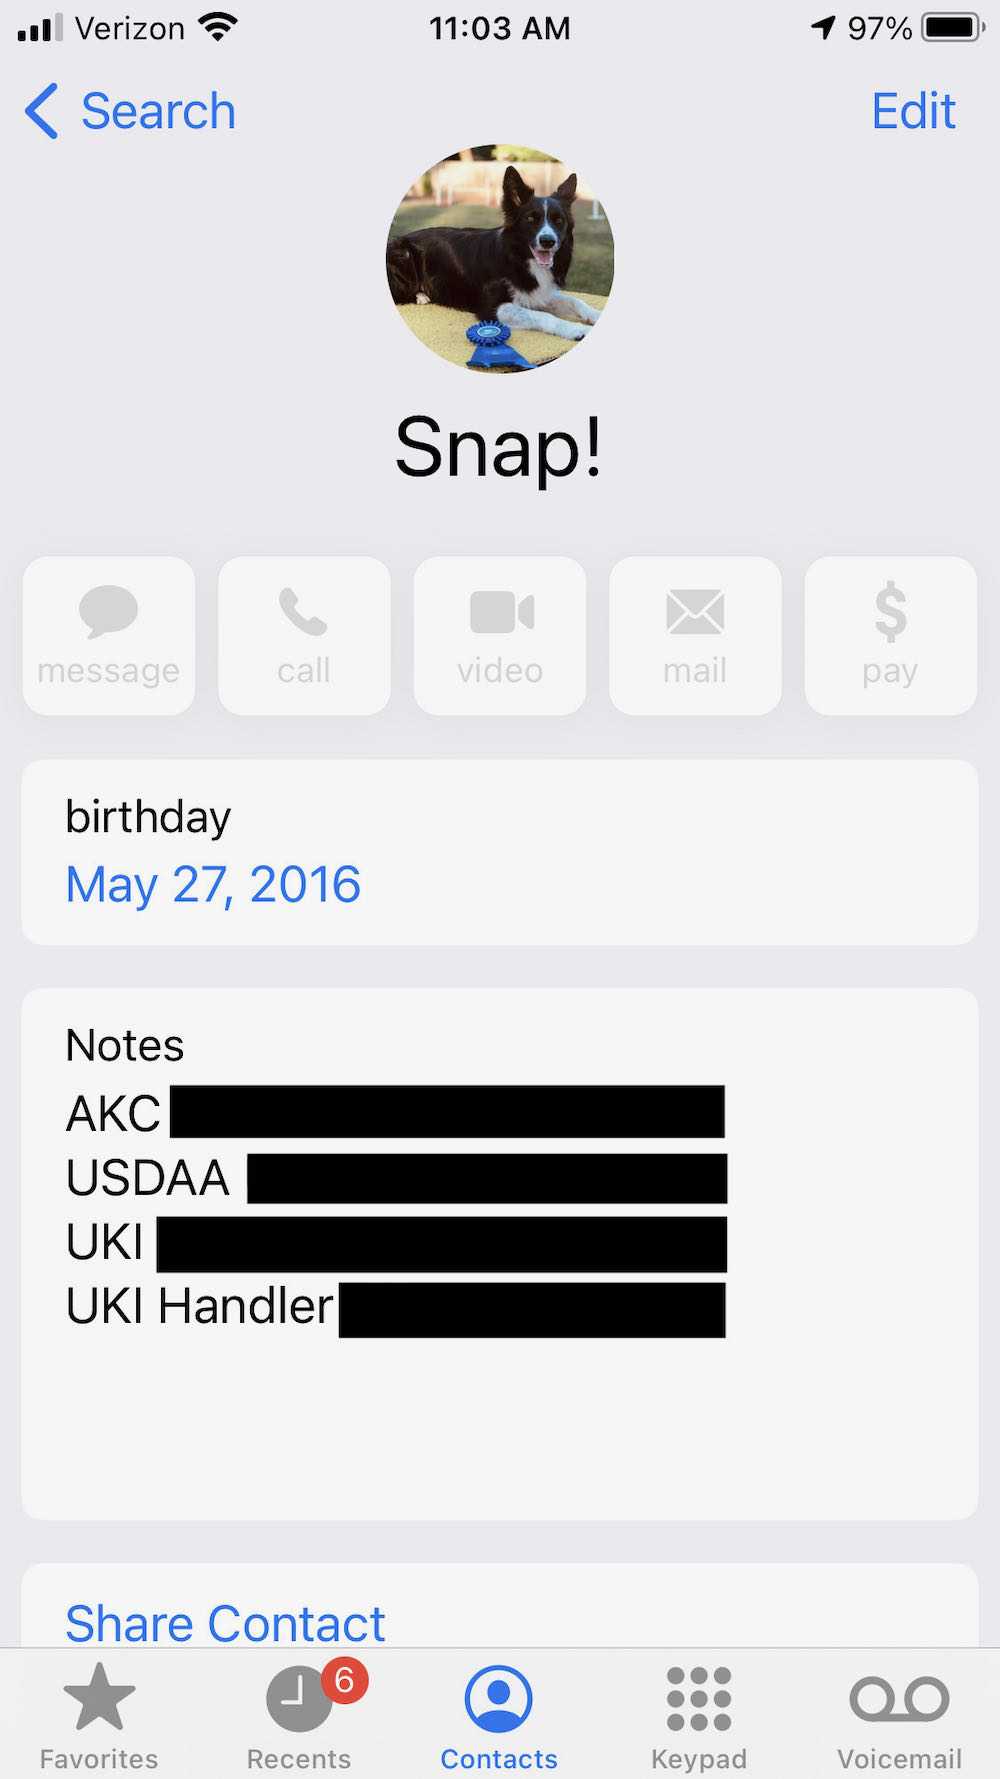 Snap!'s contact info